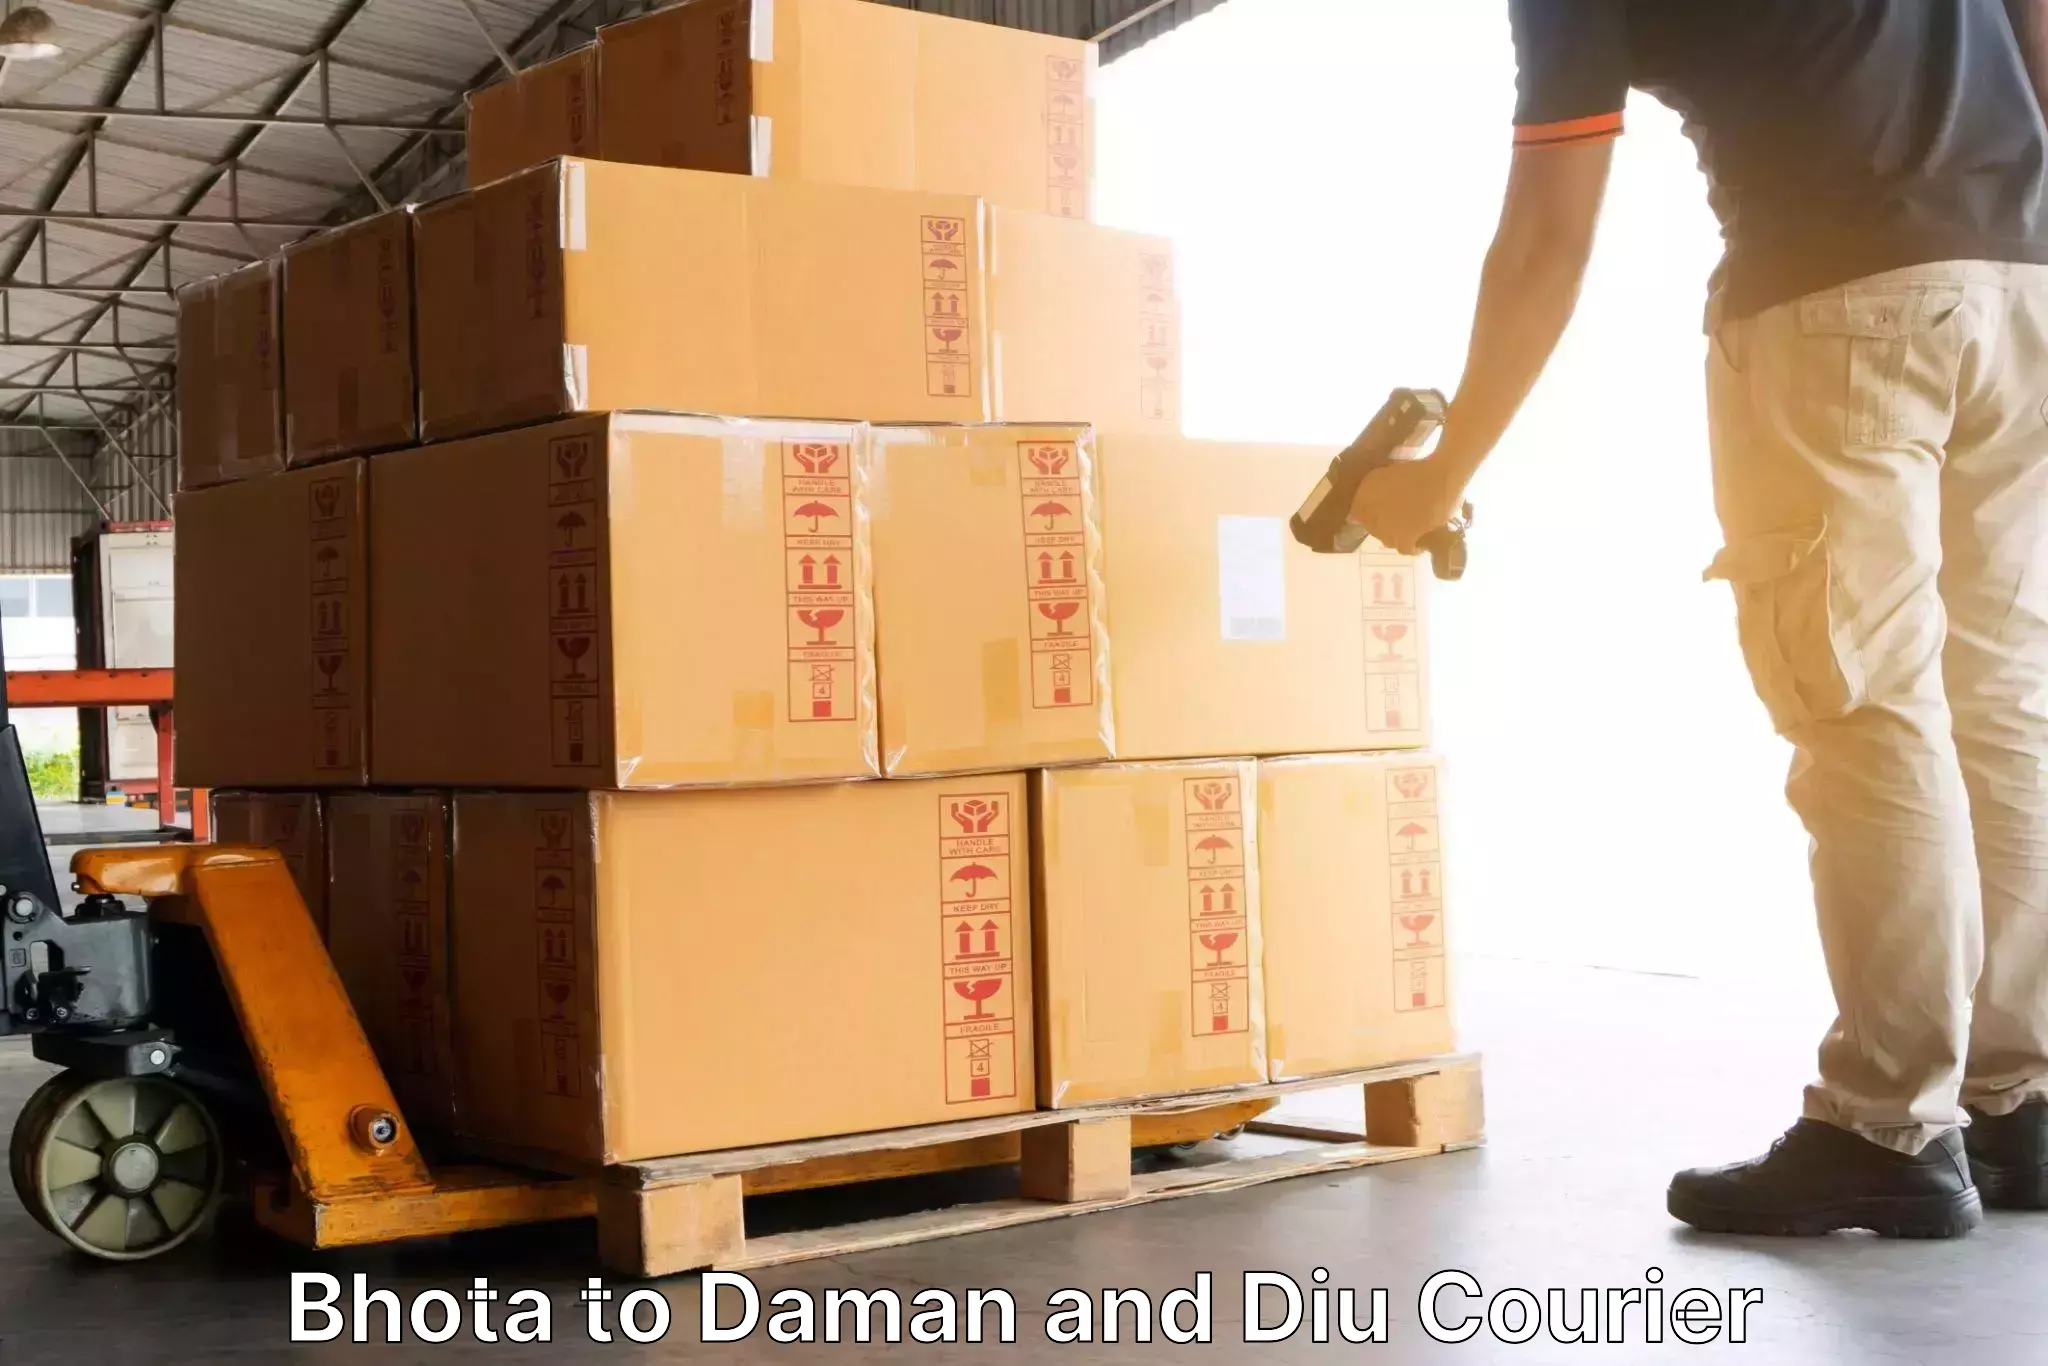 Express delivery network Bhota to Diu